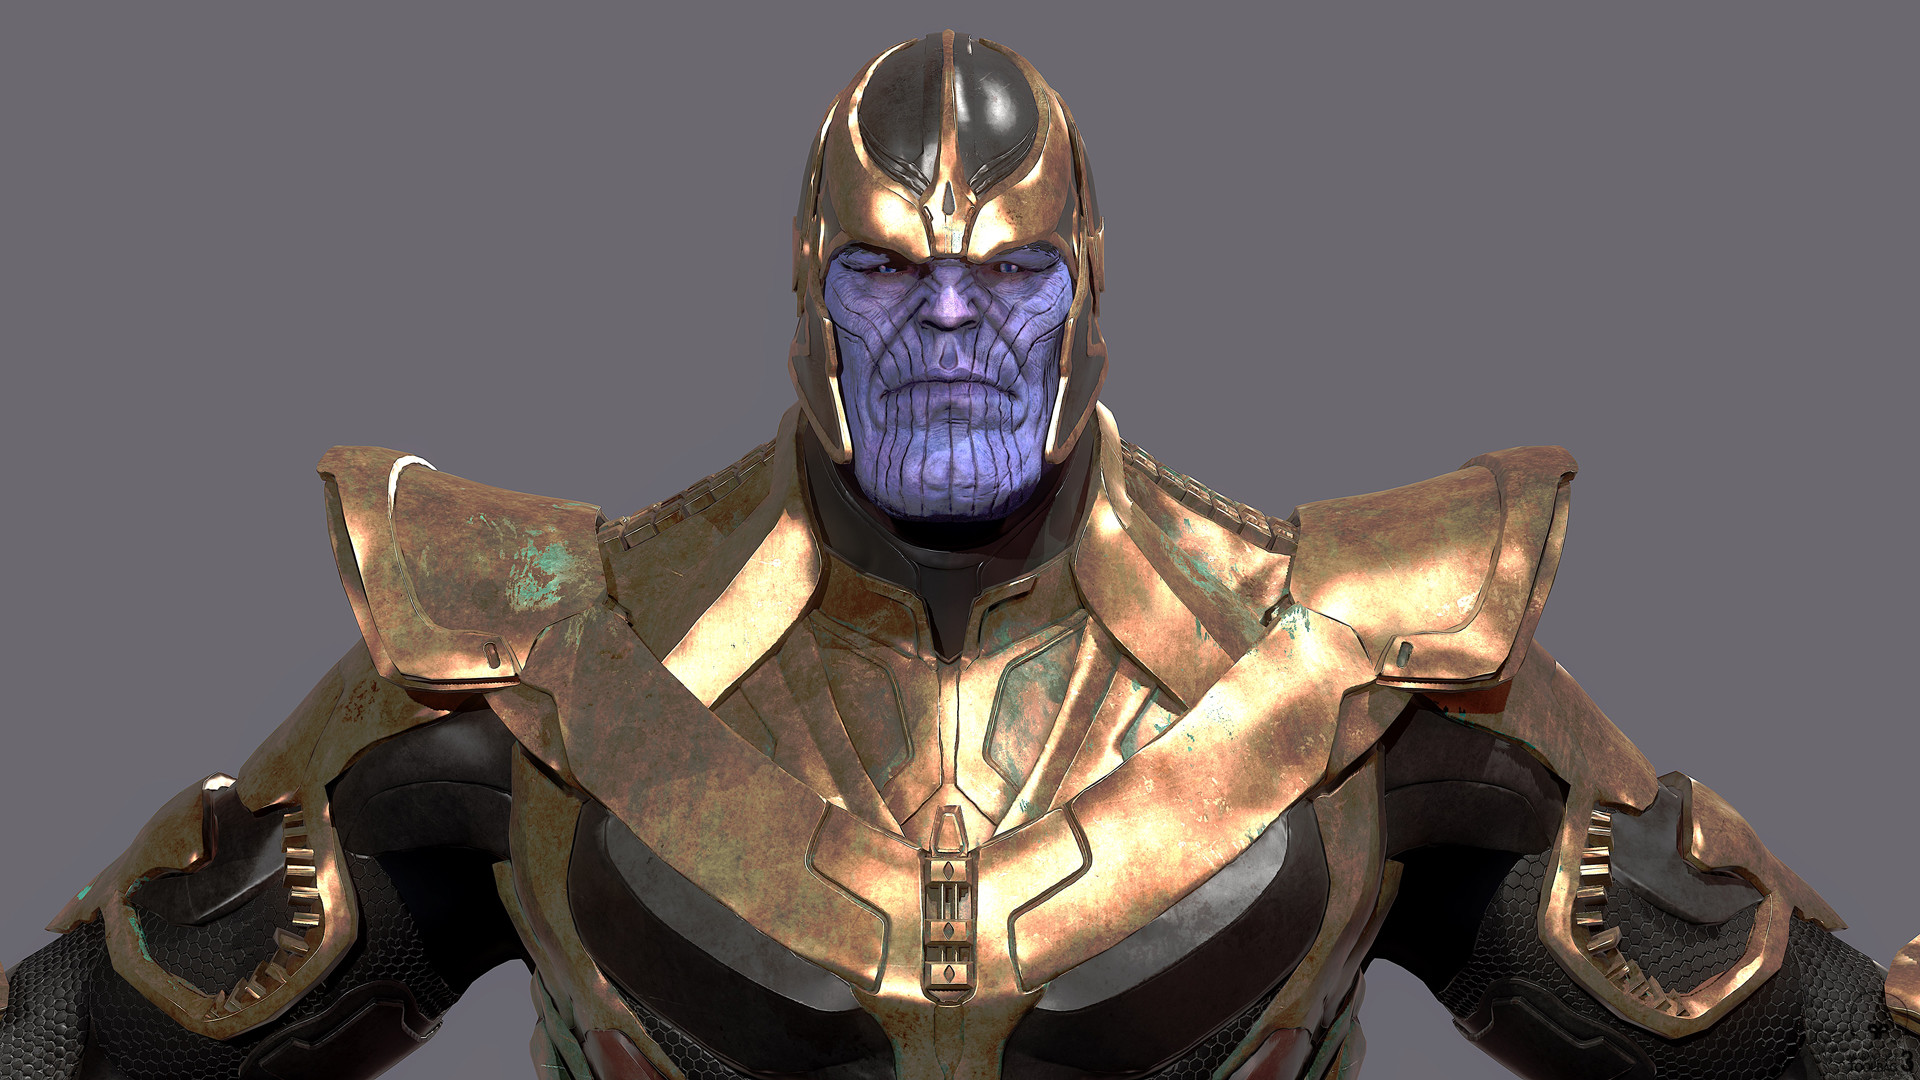 Thanos Looking At Viewer Hulk Marvel Comics Iron Man Avengers: Infinity War Thor The Avengers Marvel Cinematic Universe Frontal View Marvel